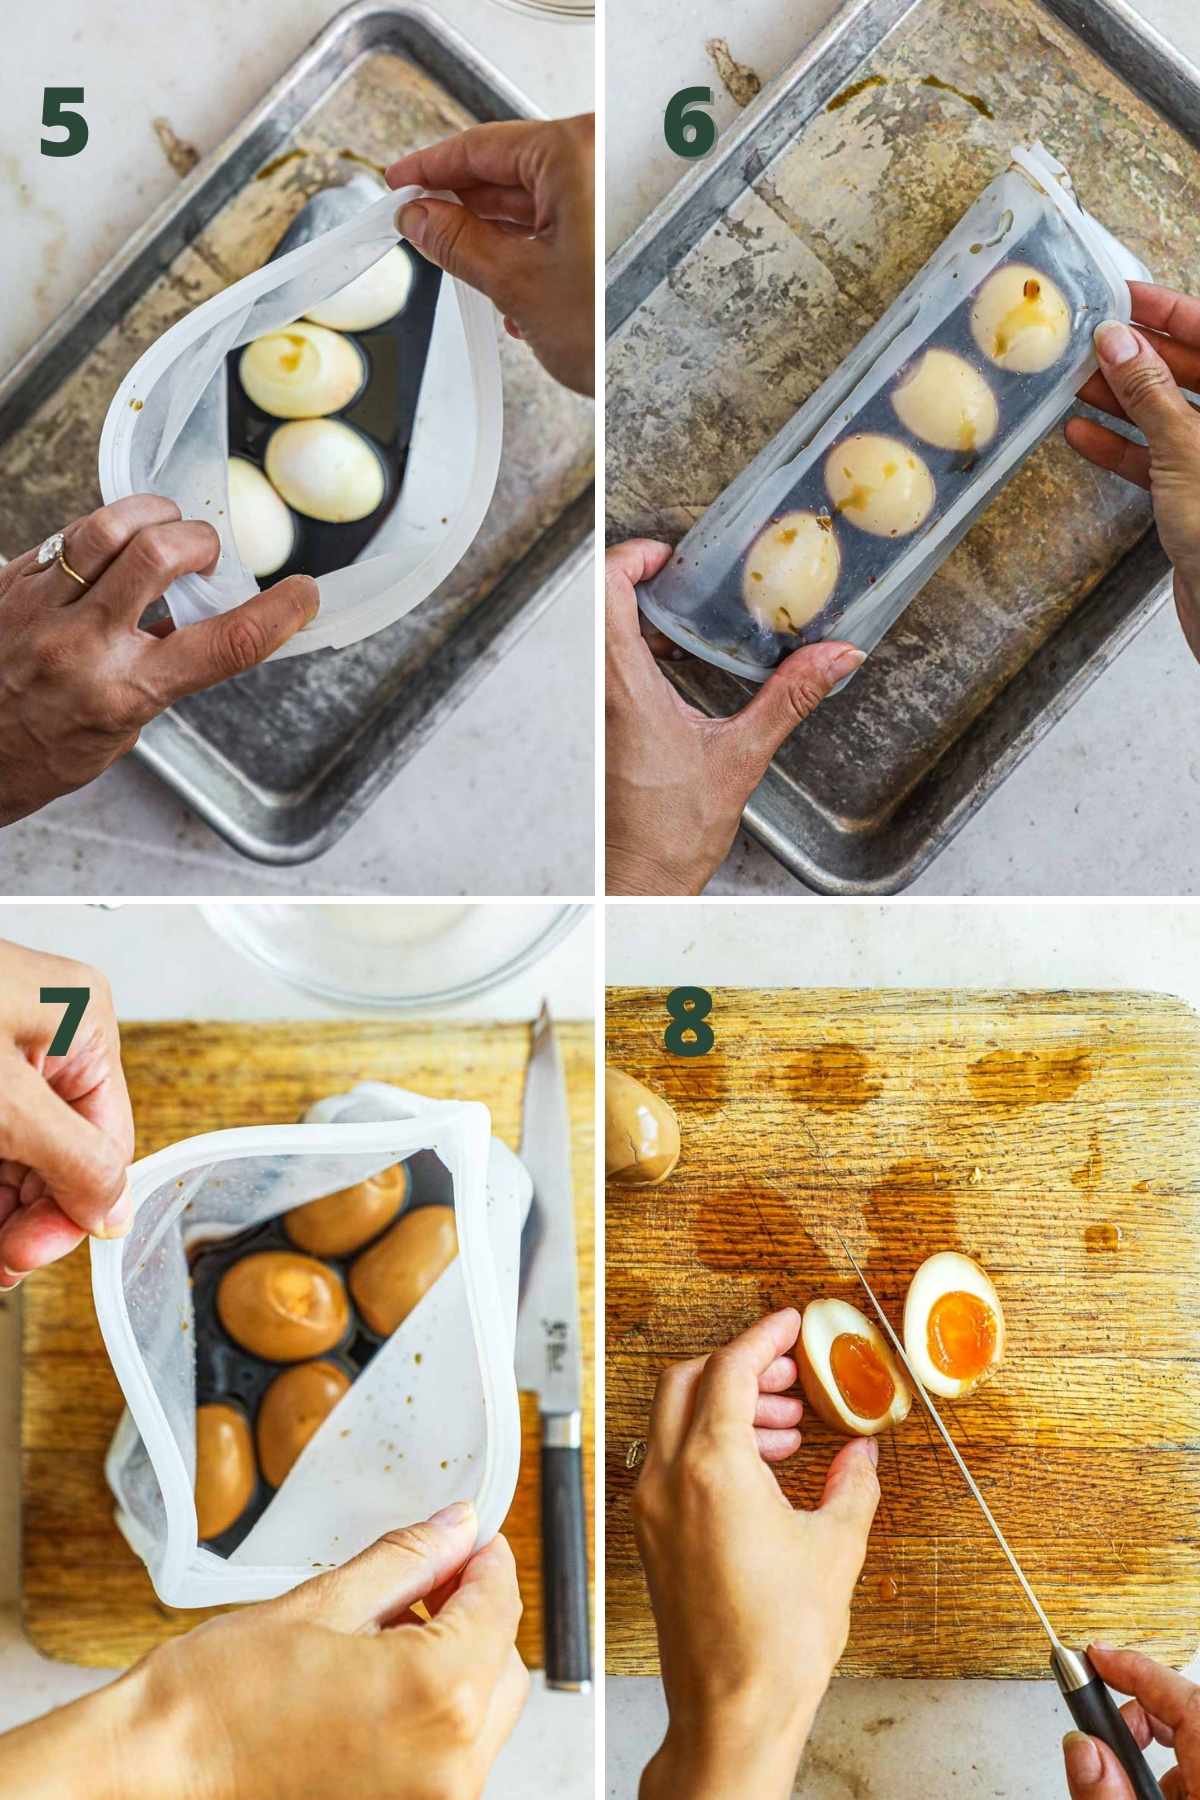 Steps to make ajitama ramen eggs, including marinating the eggs, chilling the eggs overnight, and slicing the marinated eggs.